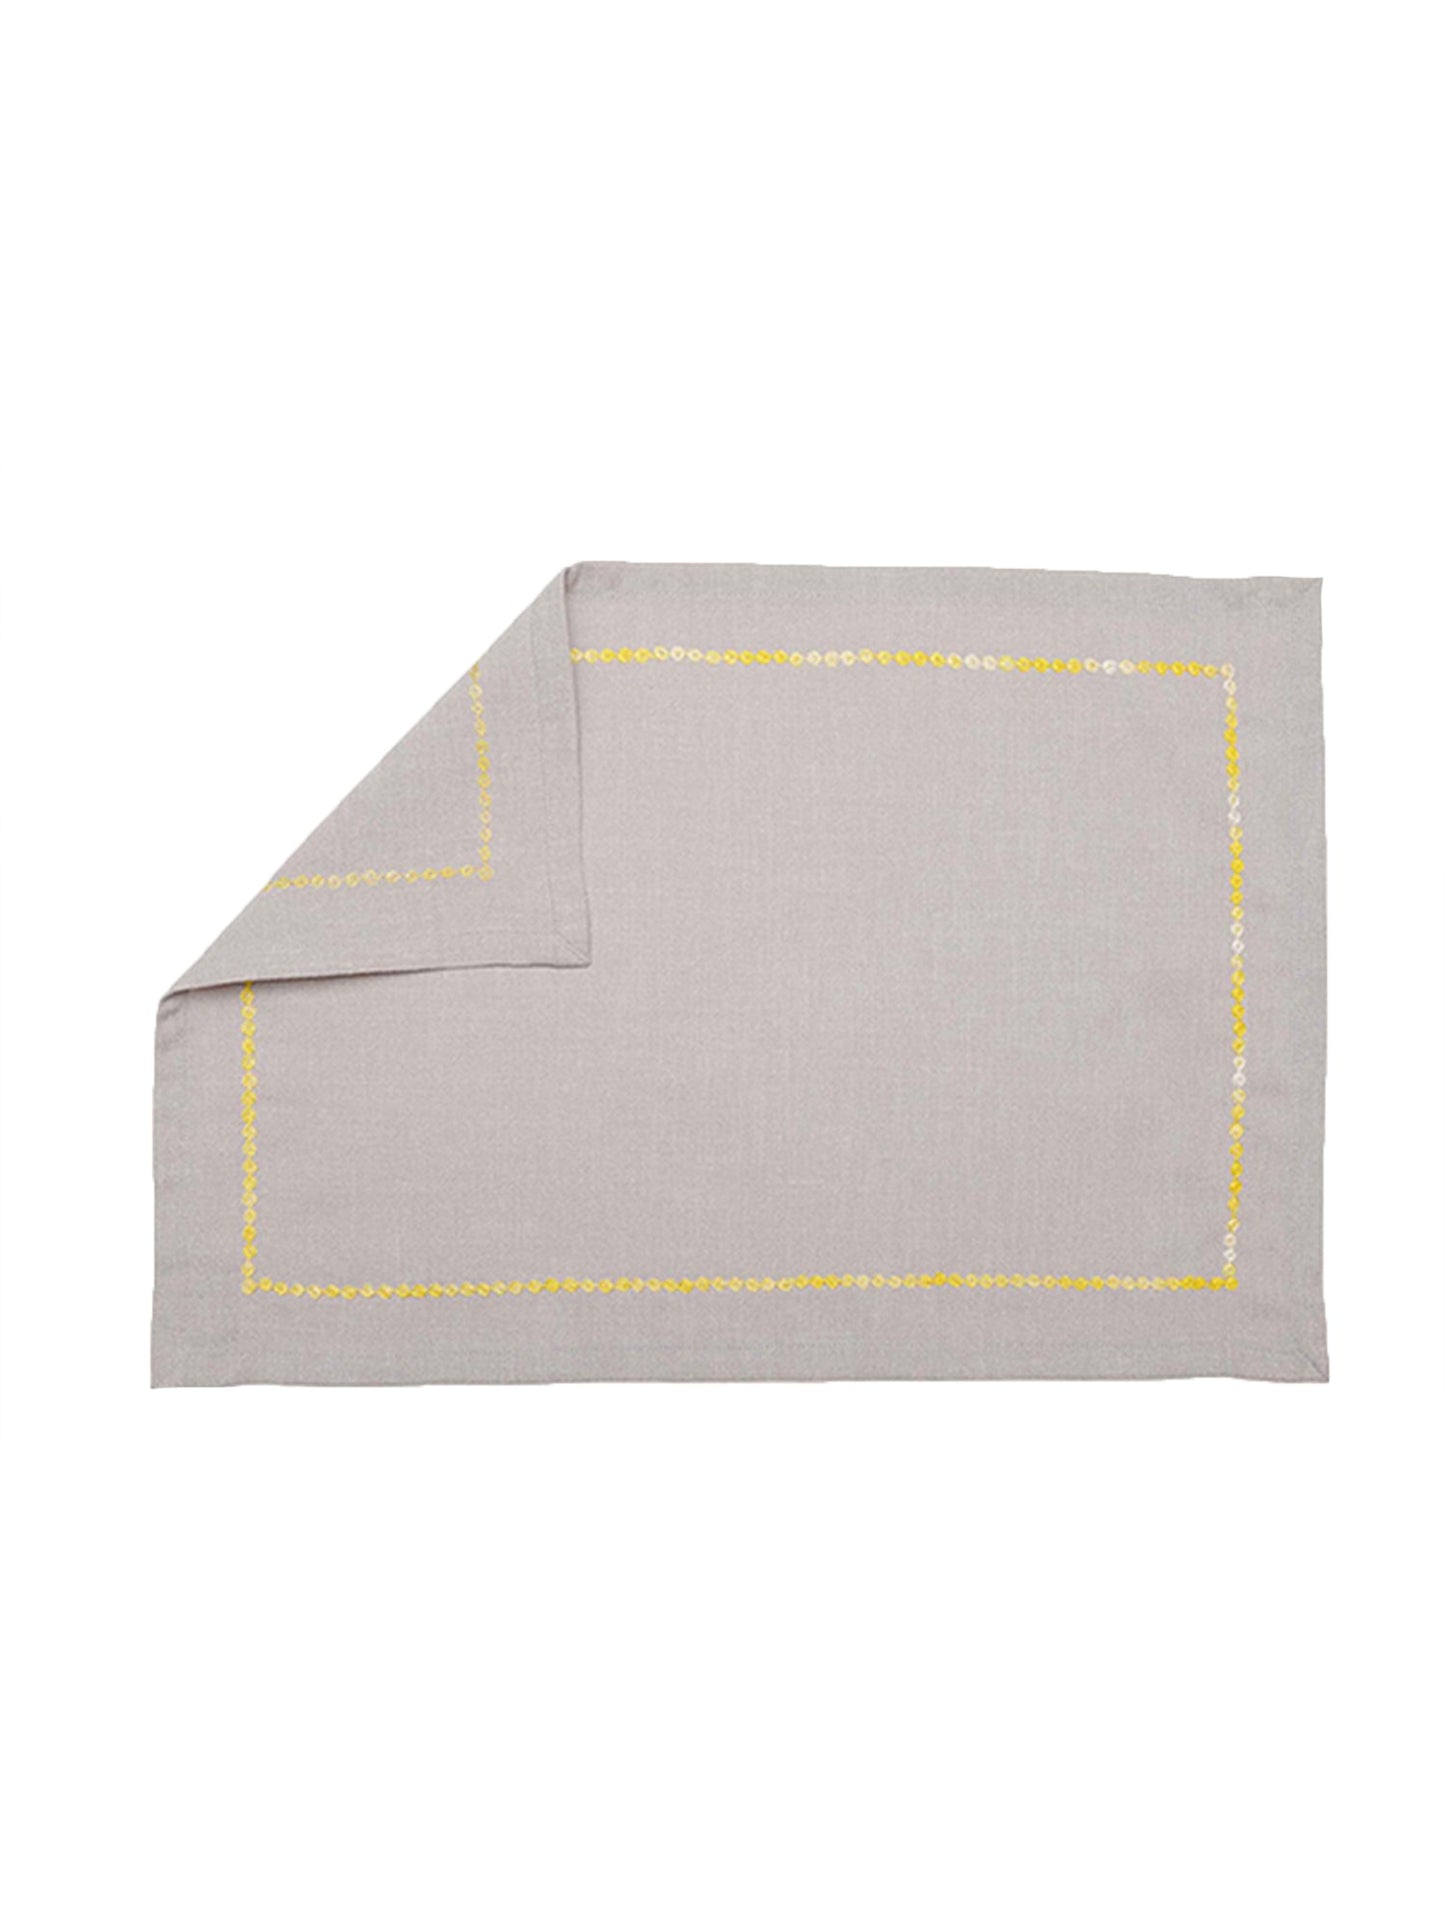 Table Mats and Napkins Poly Blended and 100% Cotton Embroidered Grey and Mushroom Grey - 13" x 19" ; 16" x 16" - Set of 6